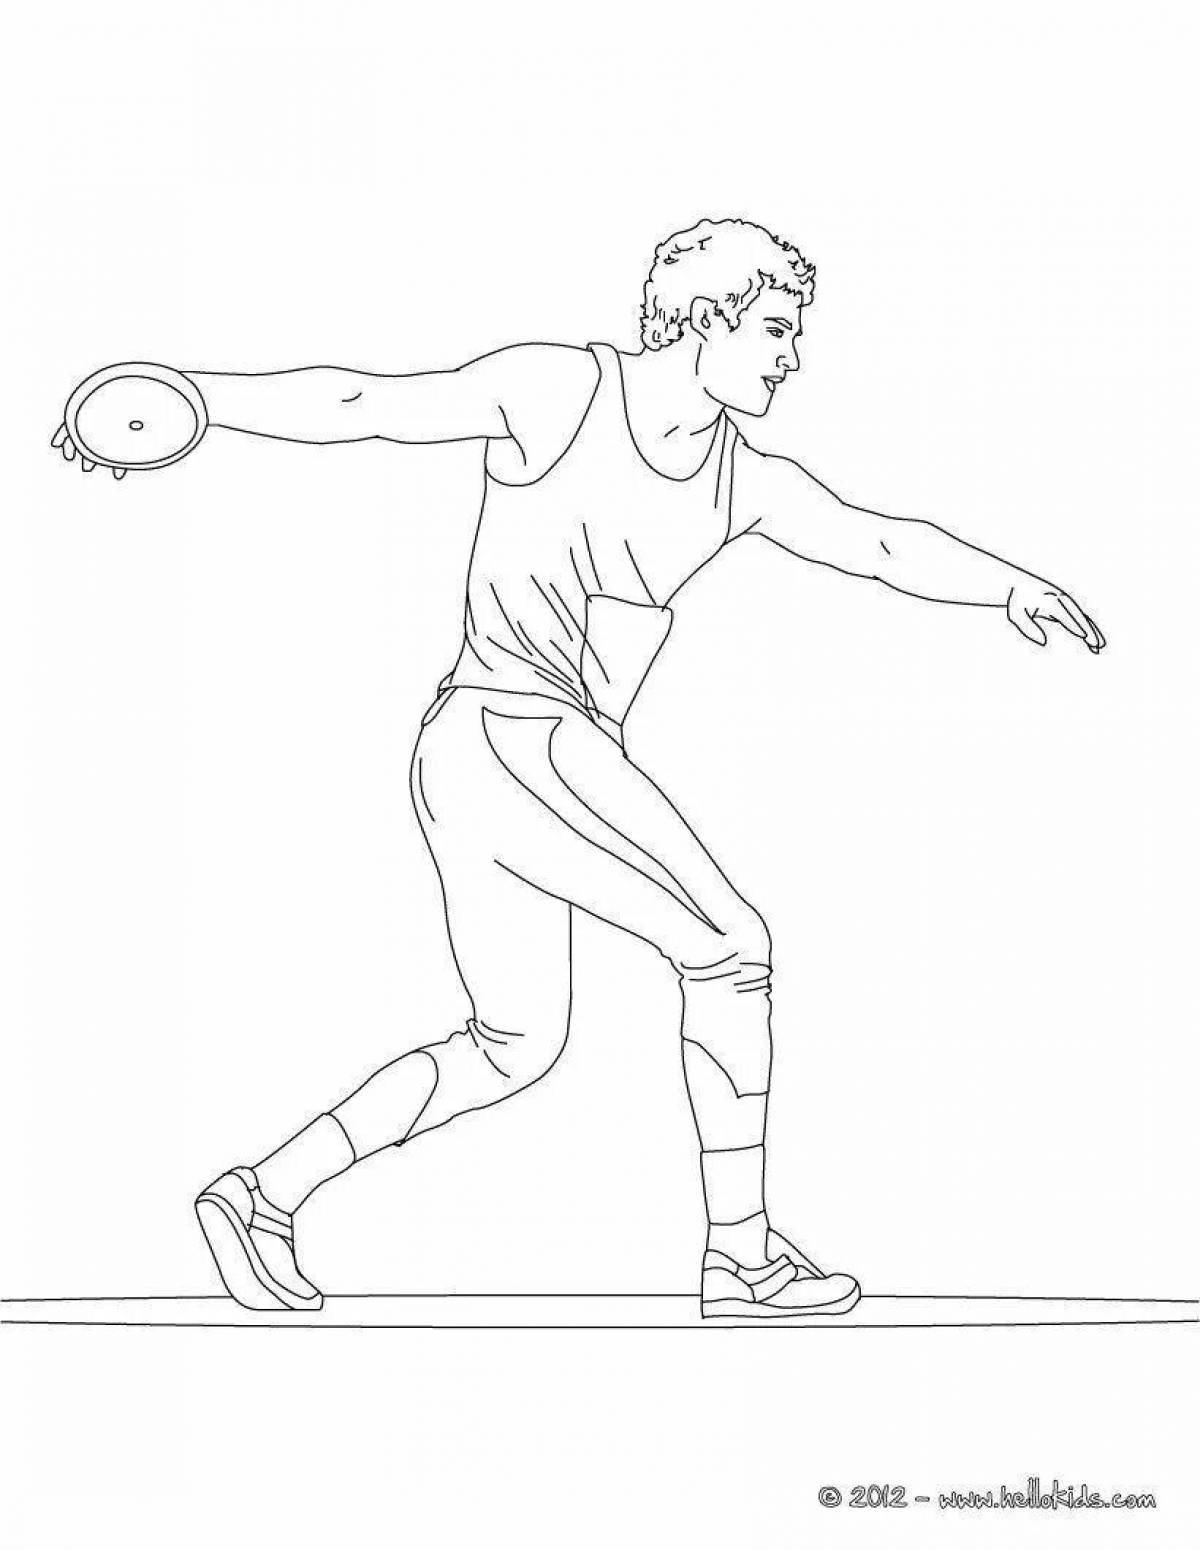 Radiant coloring page athlete